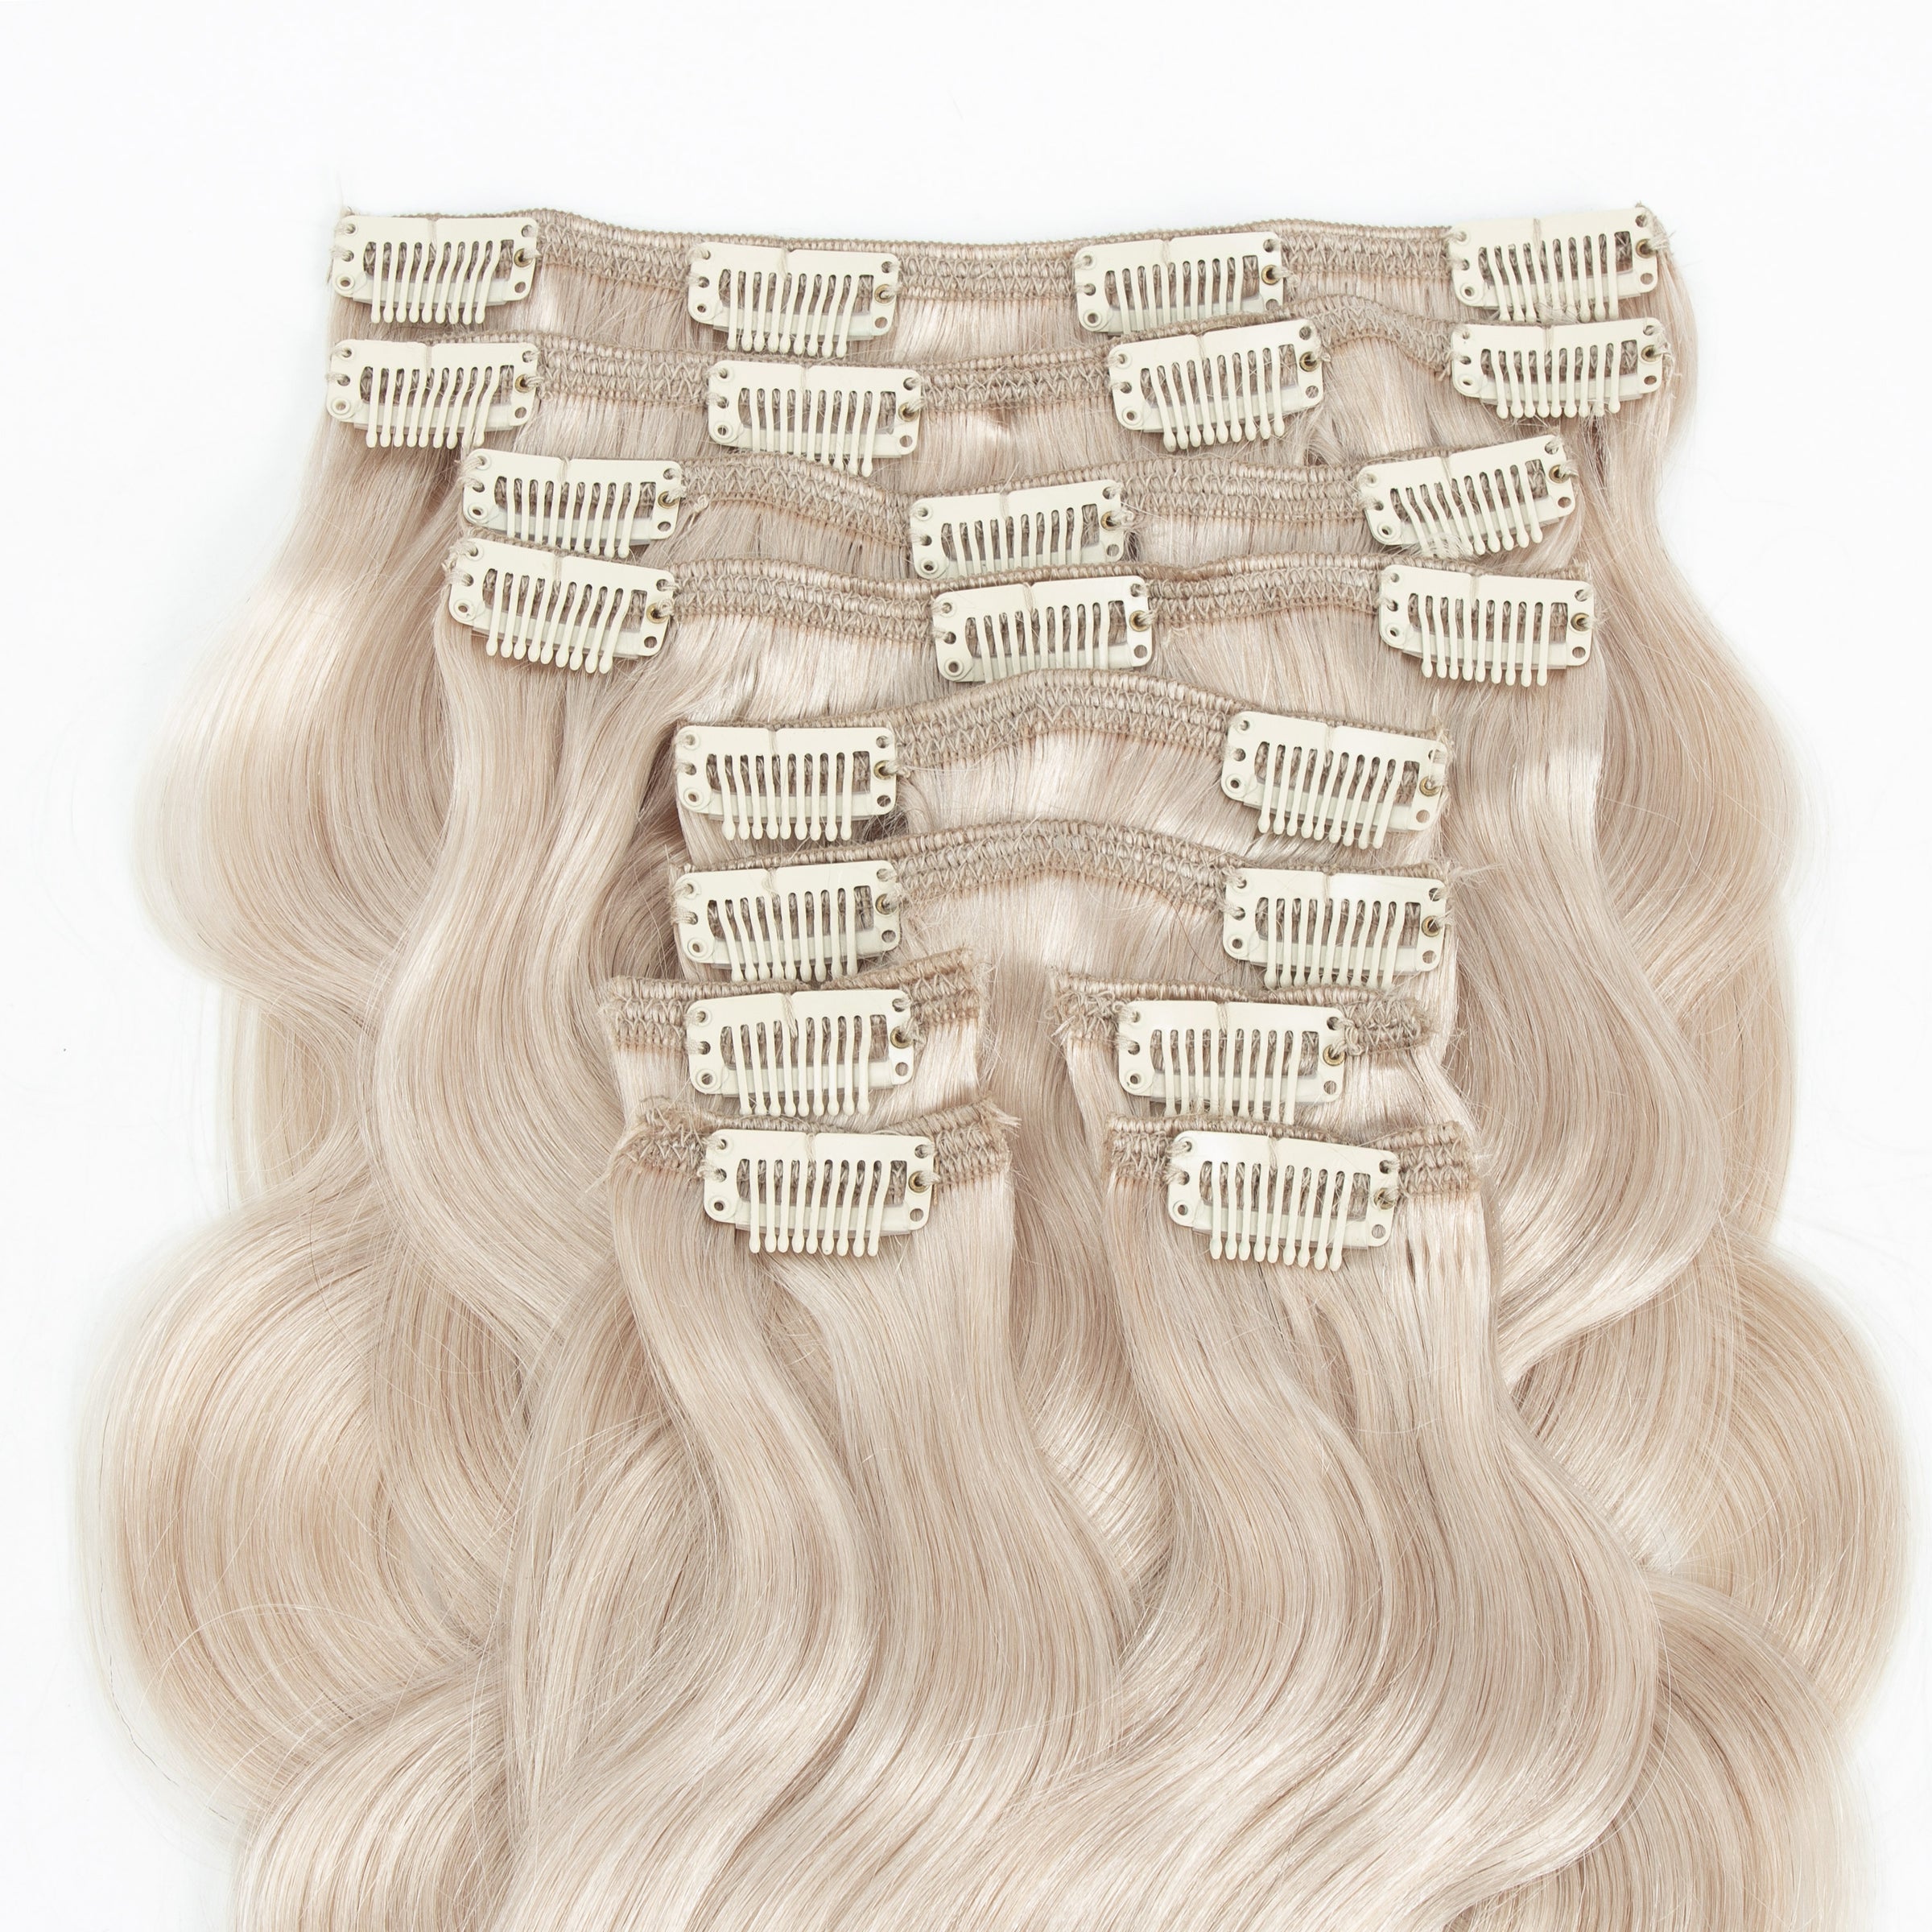 Clip In Wavy Human Hair Extensions #1001 Pearl Blonde 22"